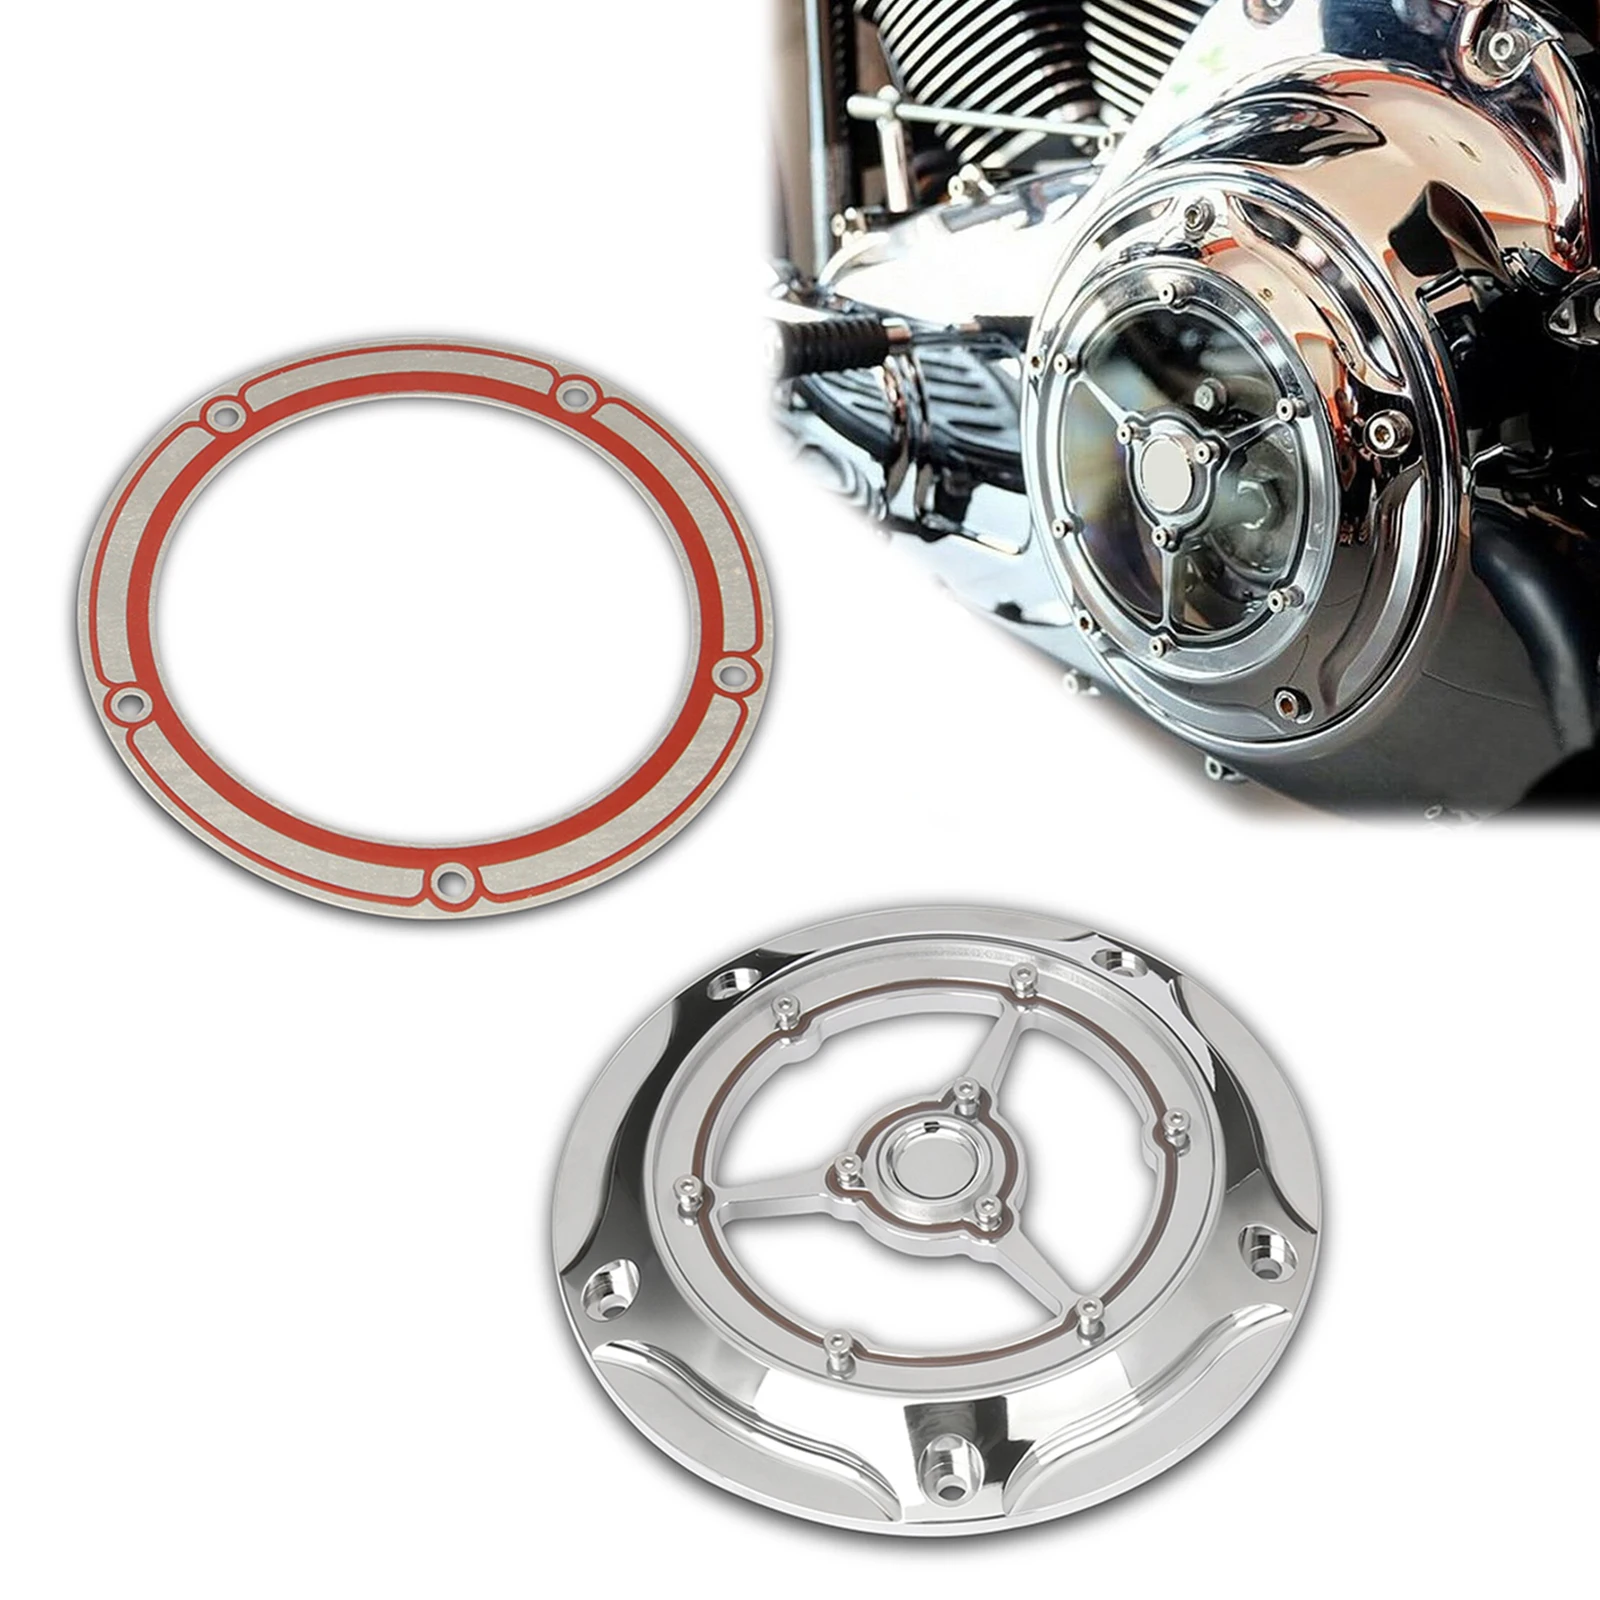 chrome-clarity-derby-cover-for-harley-road-king-electra-glide-softail-fxs-fxdl-fxdc-flhrs-1999-2015